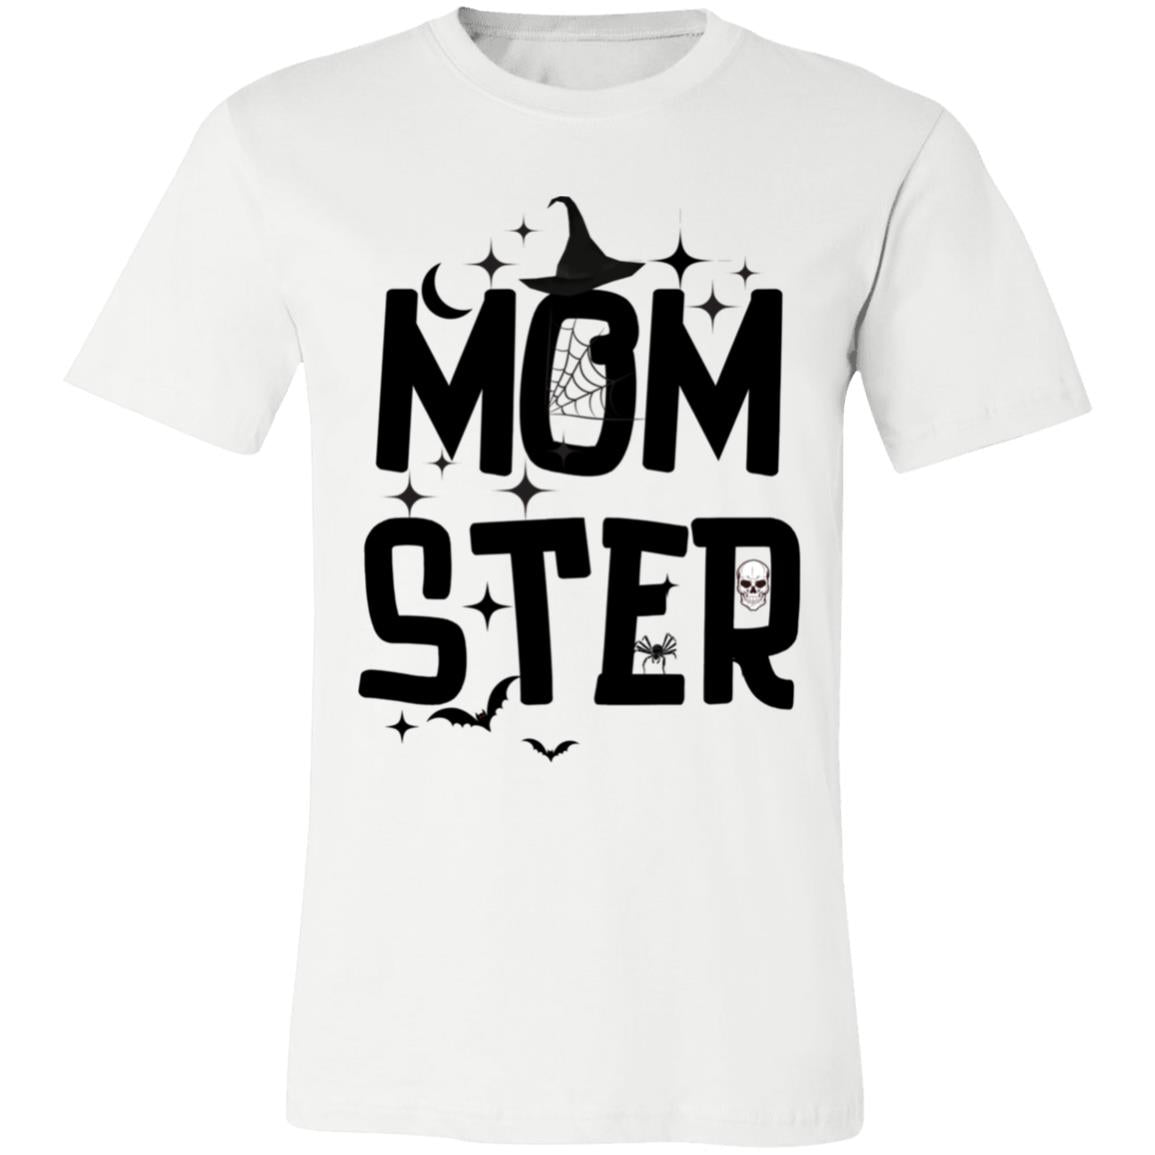 Get trendy with MOMster - T-Shirts available at Good Gift Company. Grab yours for $22.95 today!